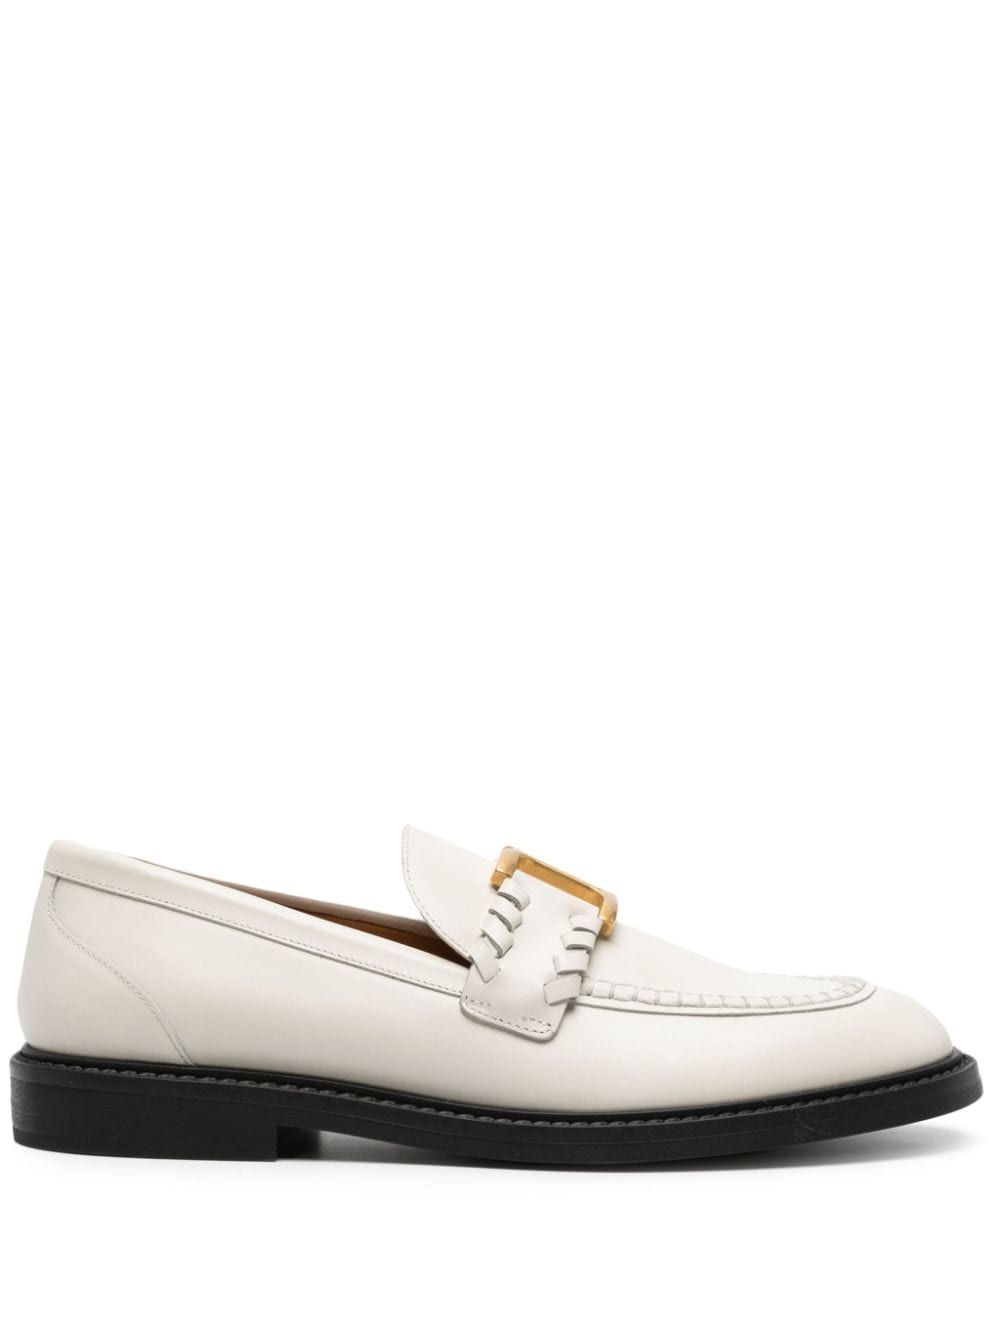 Chloé Marcie embellished leather loafers - White von Chloé